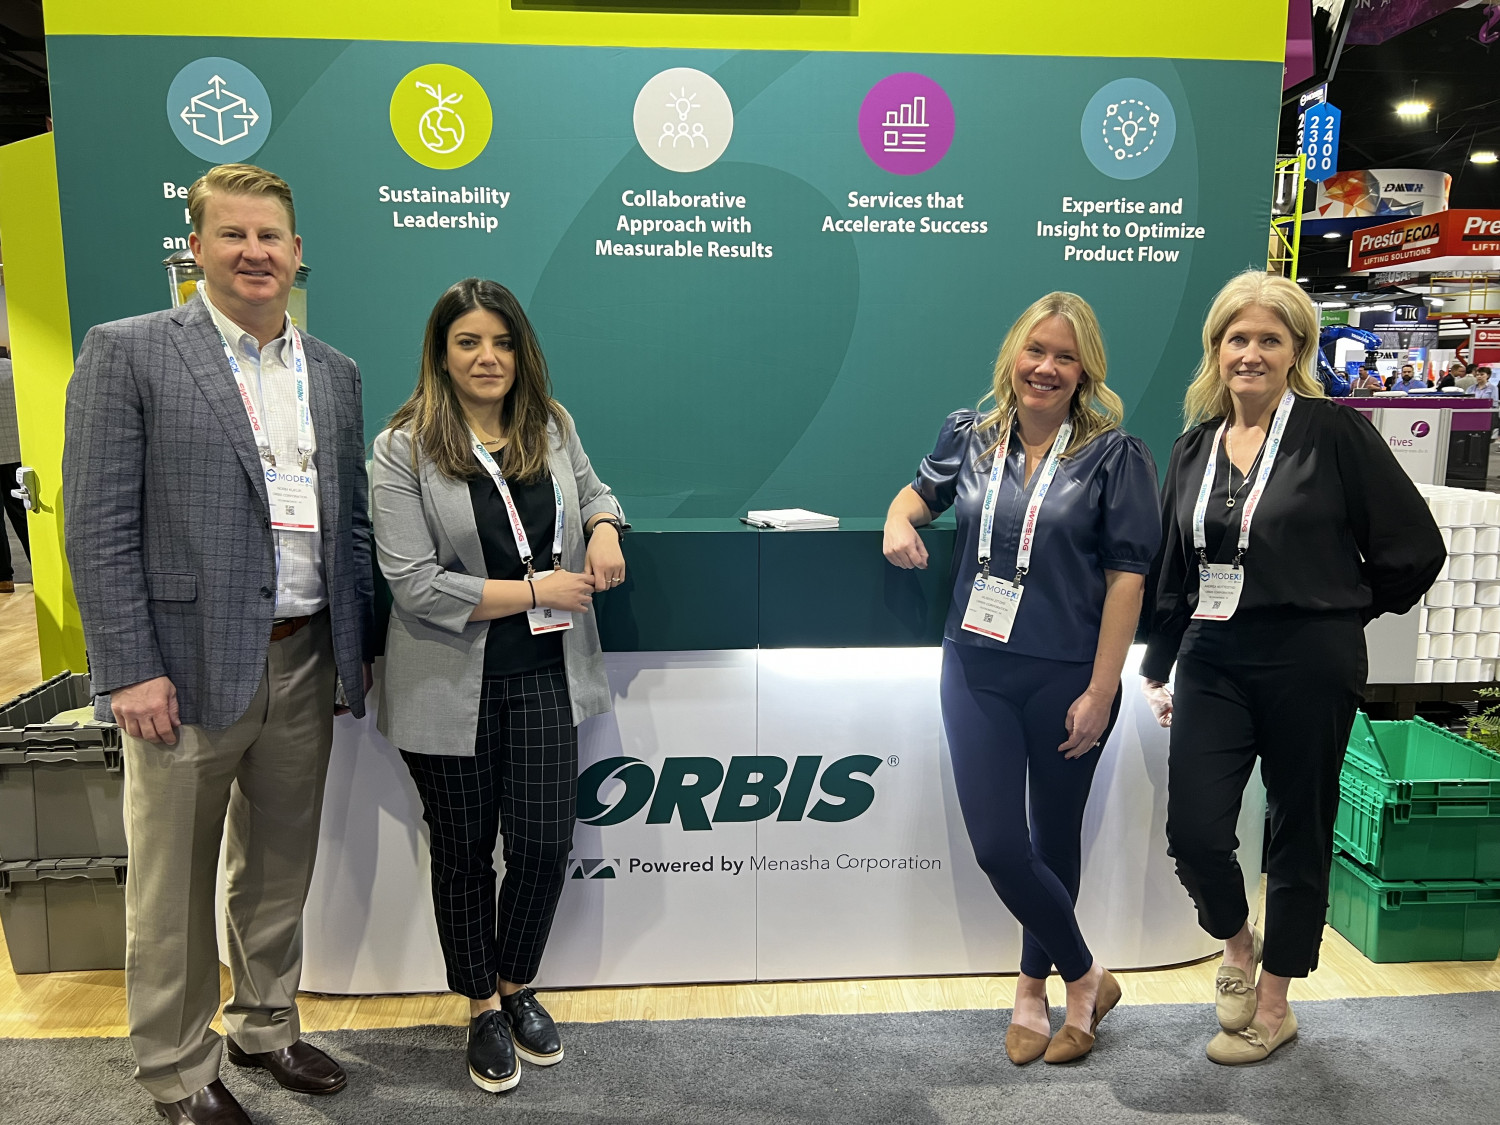 From left: ORBIS's team of Norman Kukuk, president; Jade Abdul, Sr. brand communications;  Alison Zitzke, senior product manager; and Andrea Nottesdtad, senior product manager.
